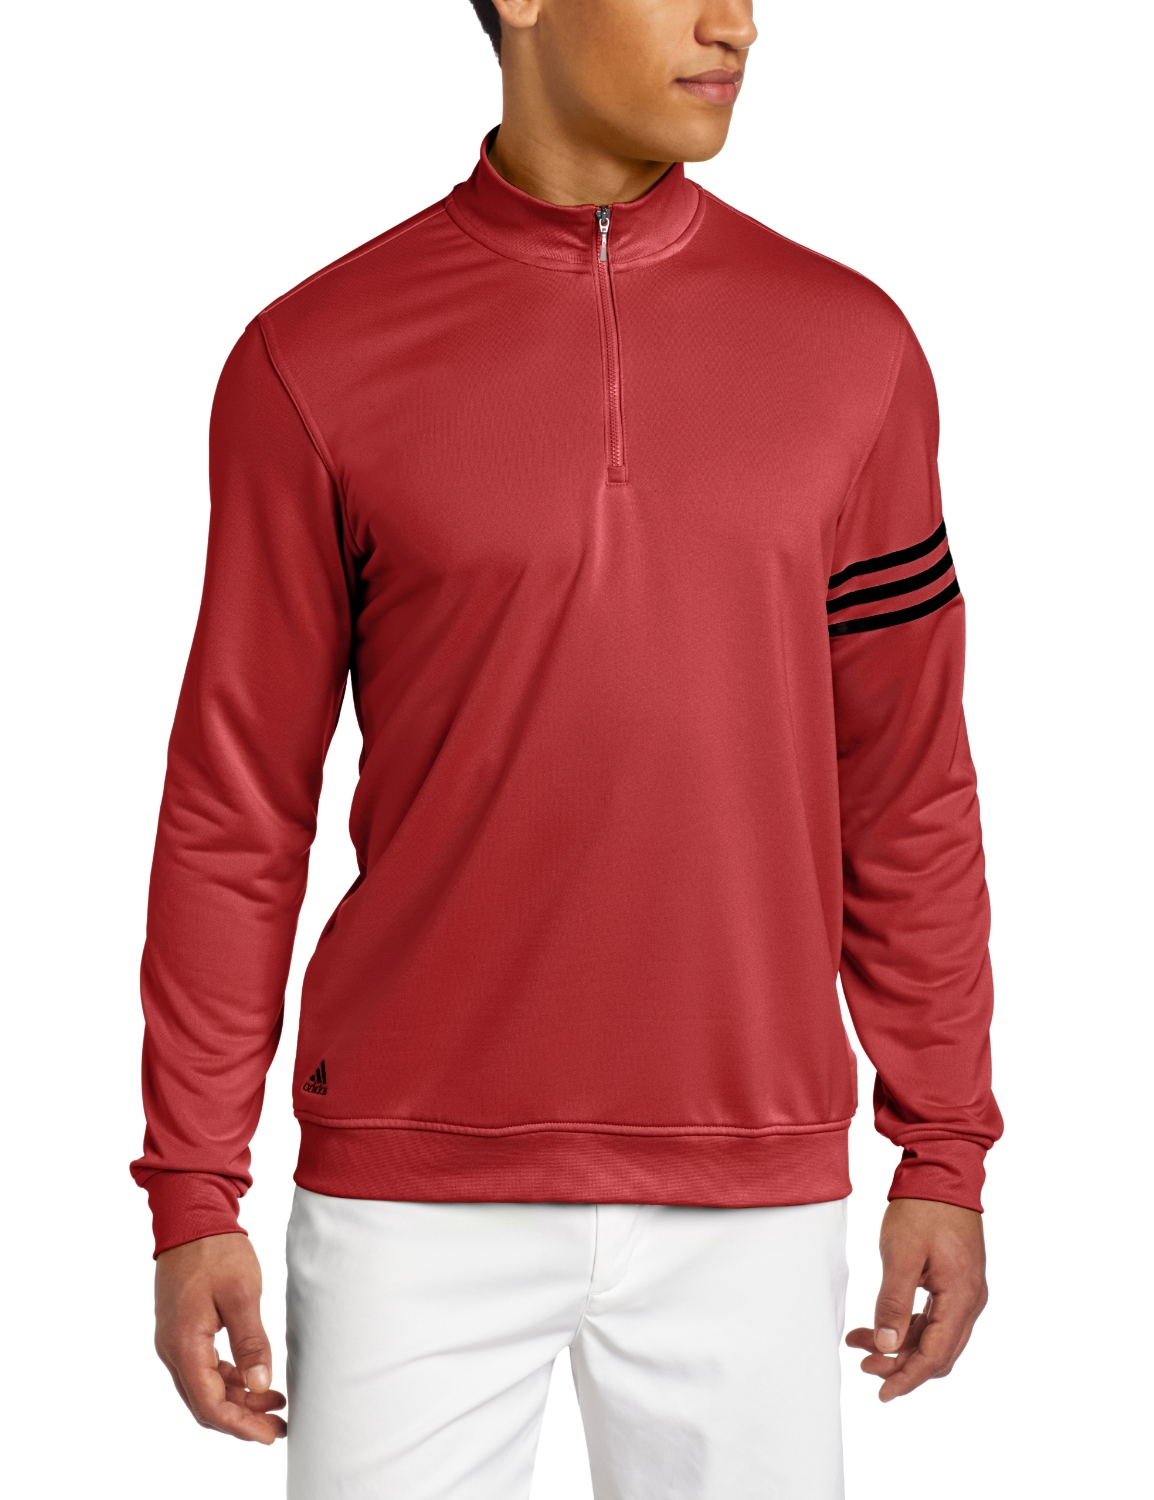 Adidas Mens Climalite Colorblock Golf Pullovers